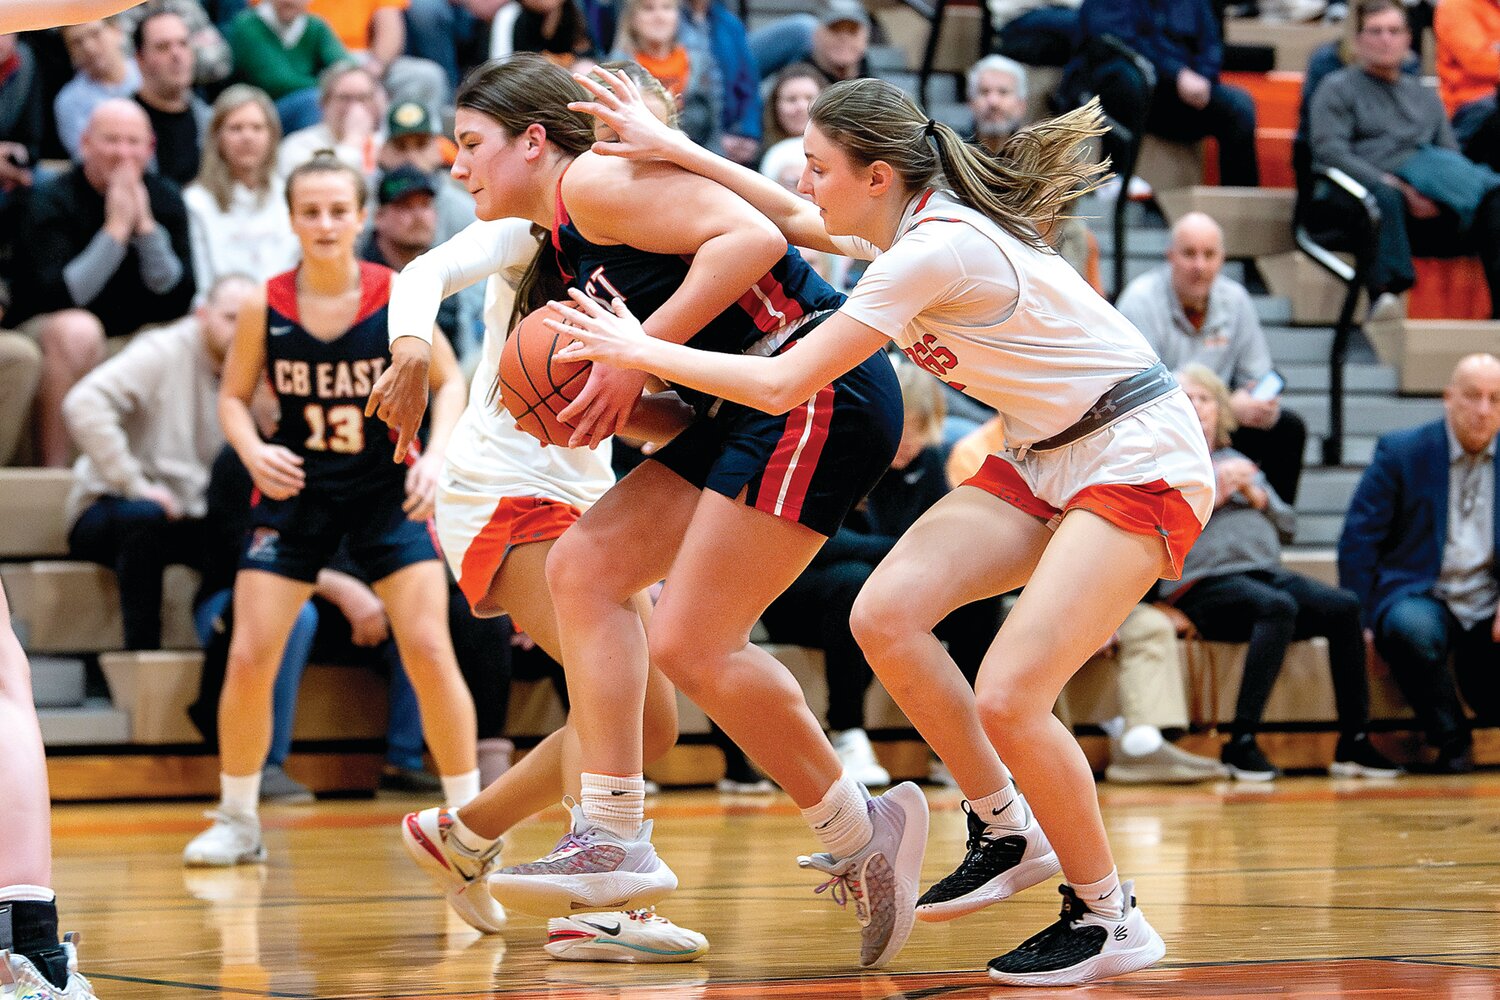 Central Bucks East’s Jess Lockwood gets fouled while driving the lane by Perkiomen Valley’s Julia Smith.